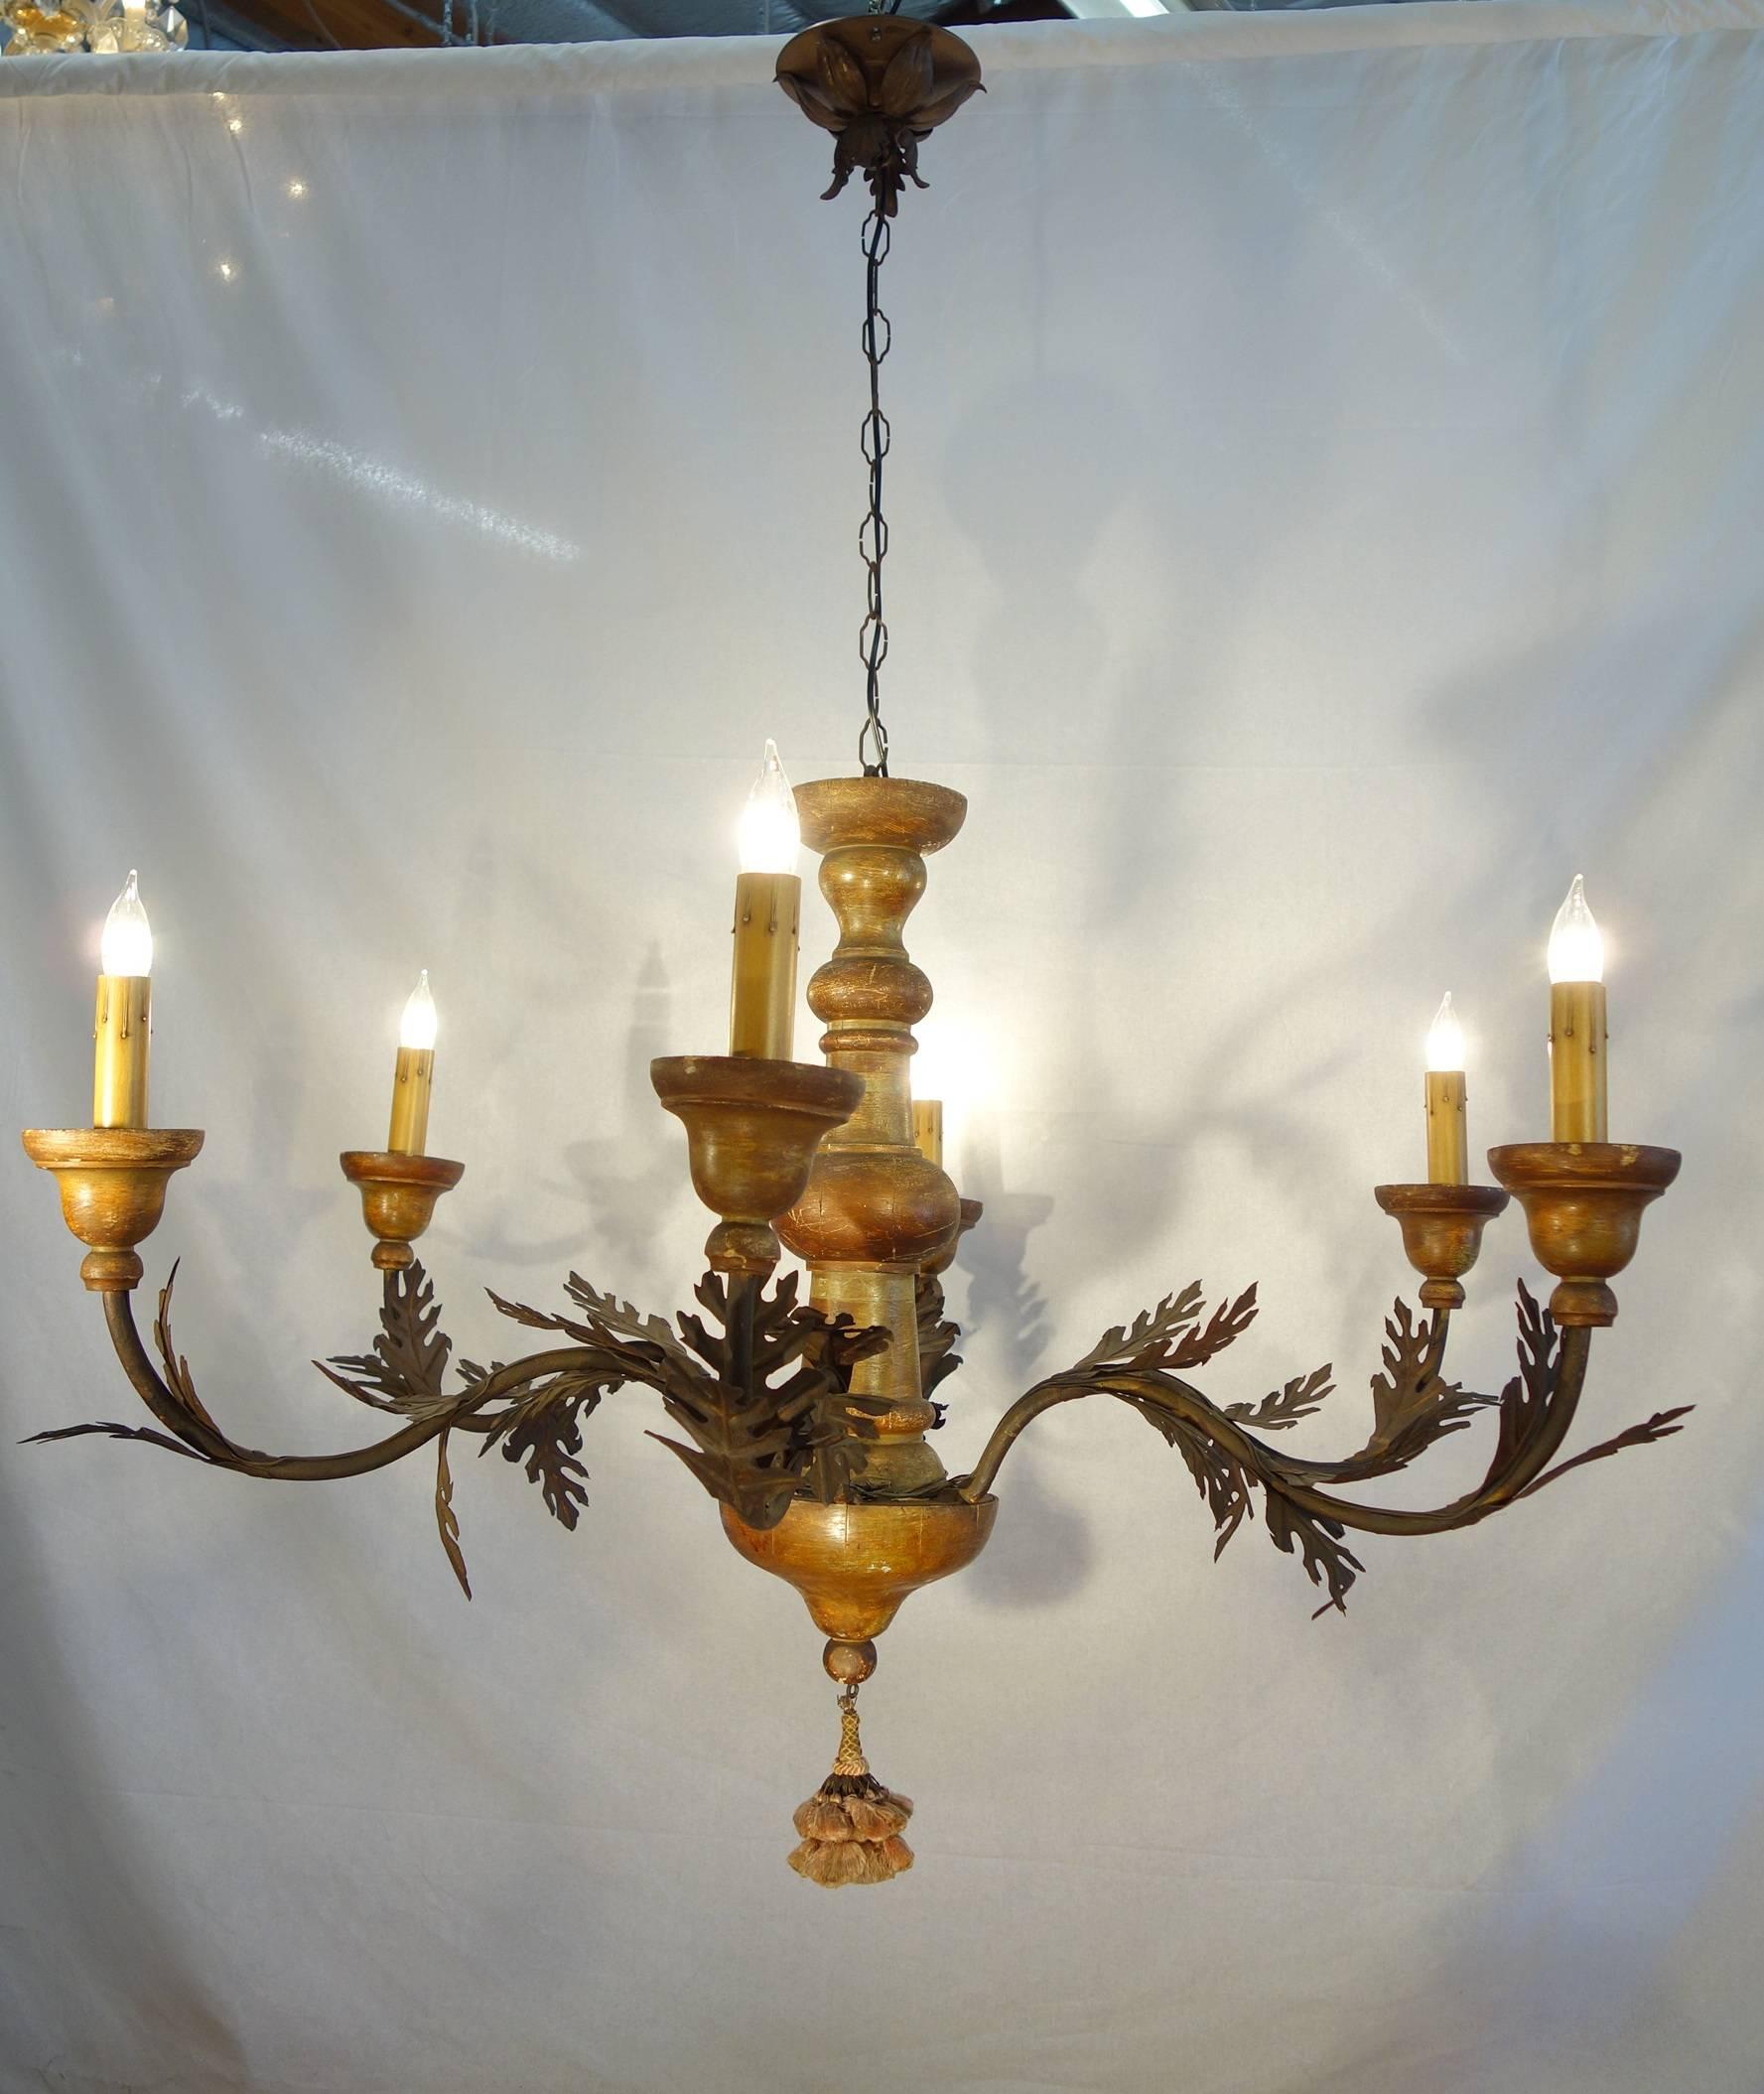 Venetian hand-painted turned and lacquered wood chandelier with six hand-forged iron arms and six lights decorated with copper leaf and cups.

UL newly rewired.

Measures: 47